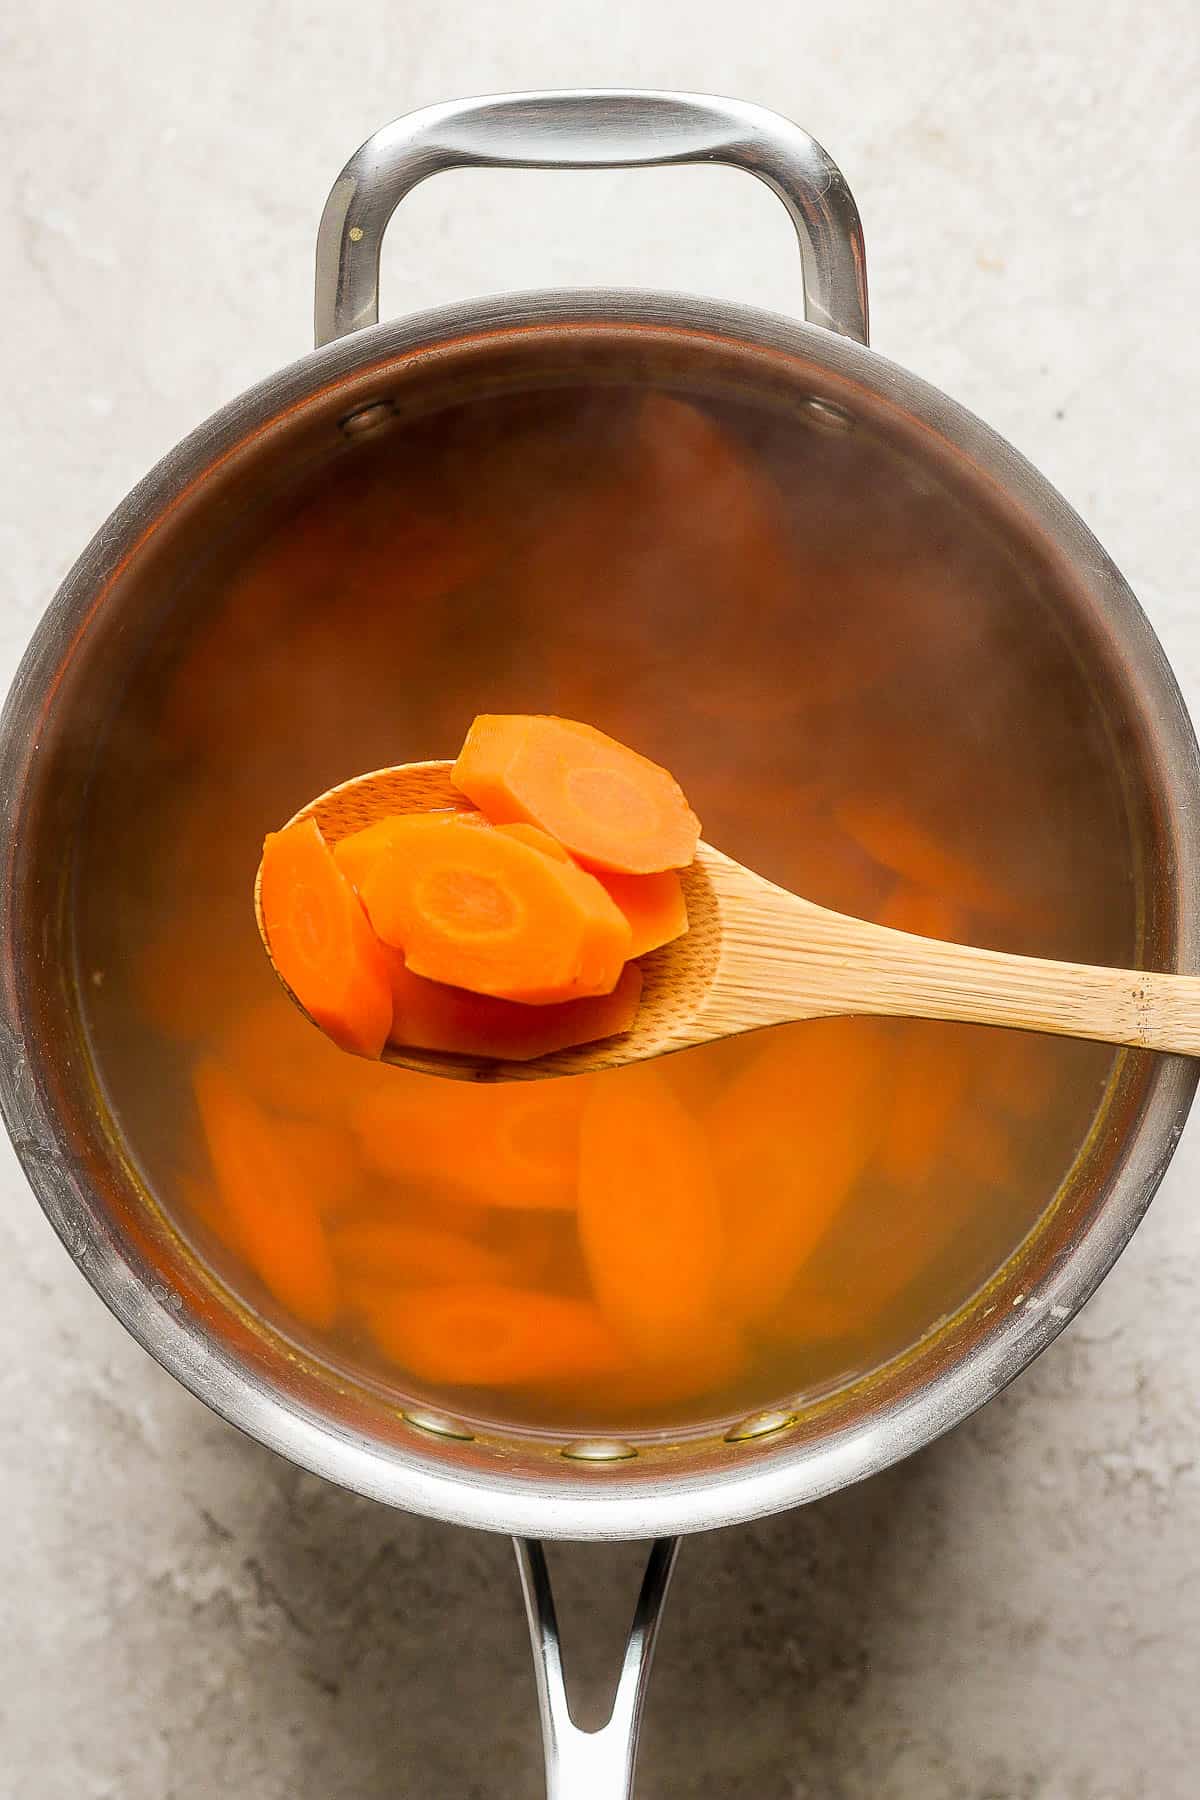 A wooden spoon scooping cooked carrots out of a pot.